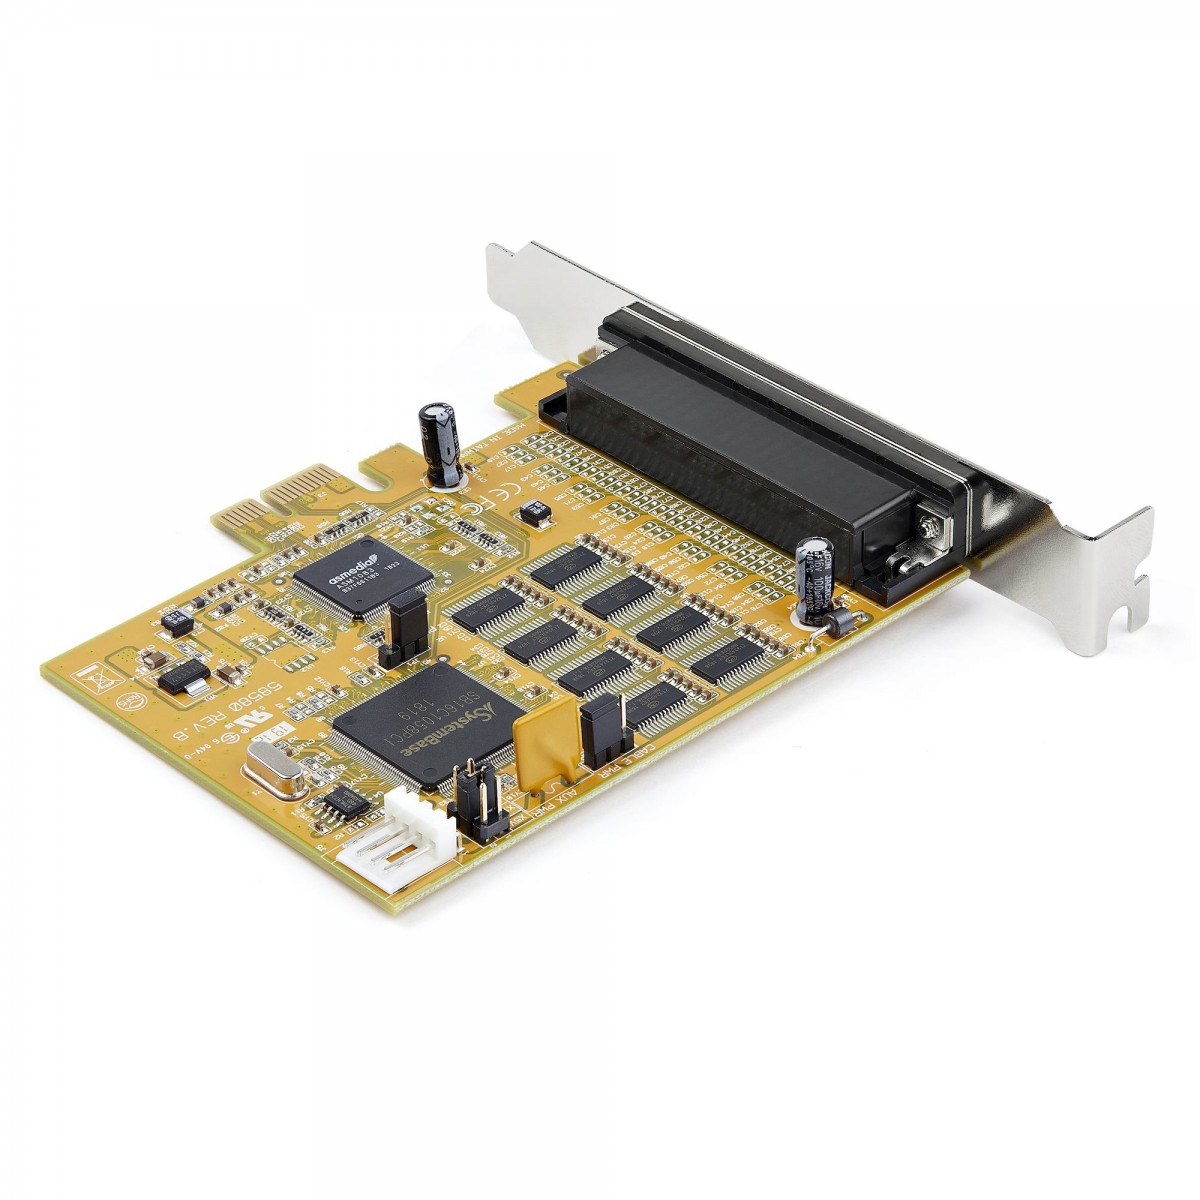 StarTech.com 8-Port PCI Express RS232 Serial Adapter Card - PCIe RS232 Serial Card - 16C1050 UART - Multiport Serial DB9 Control